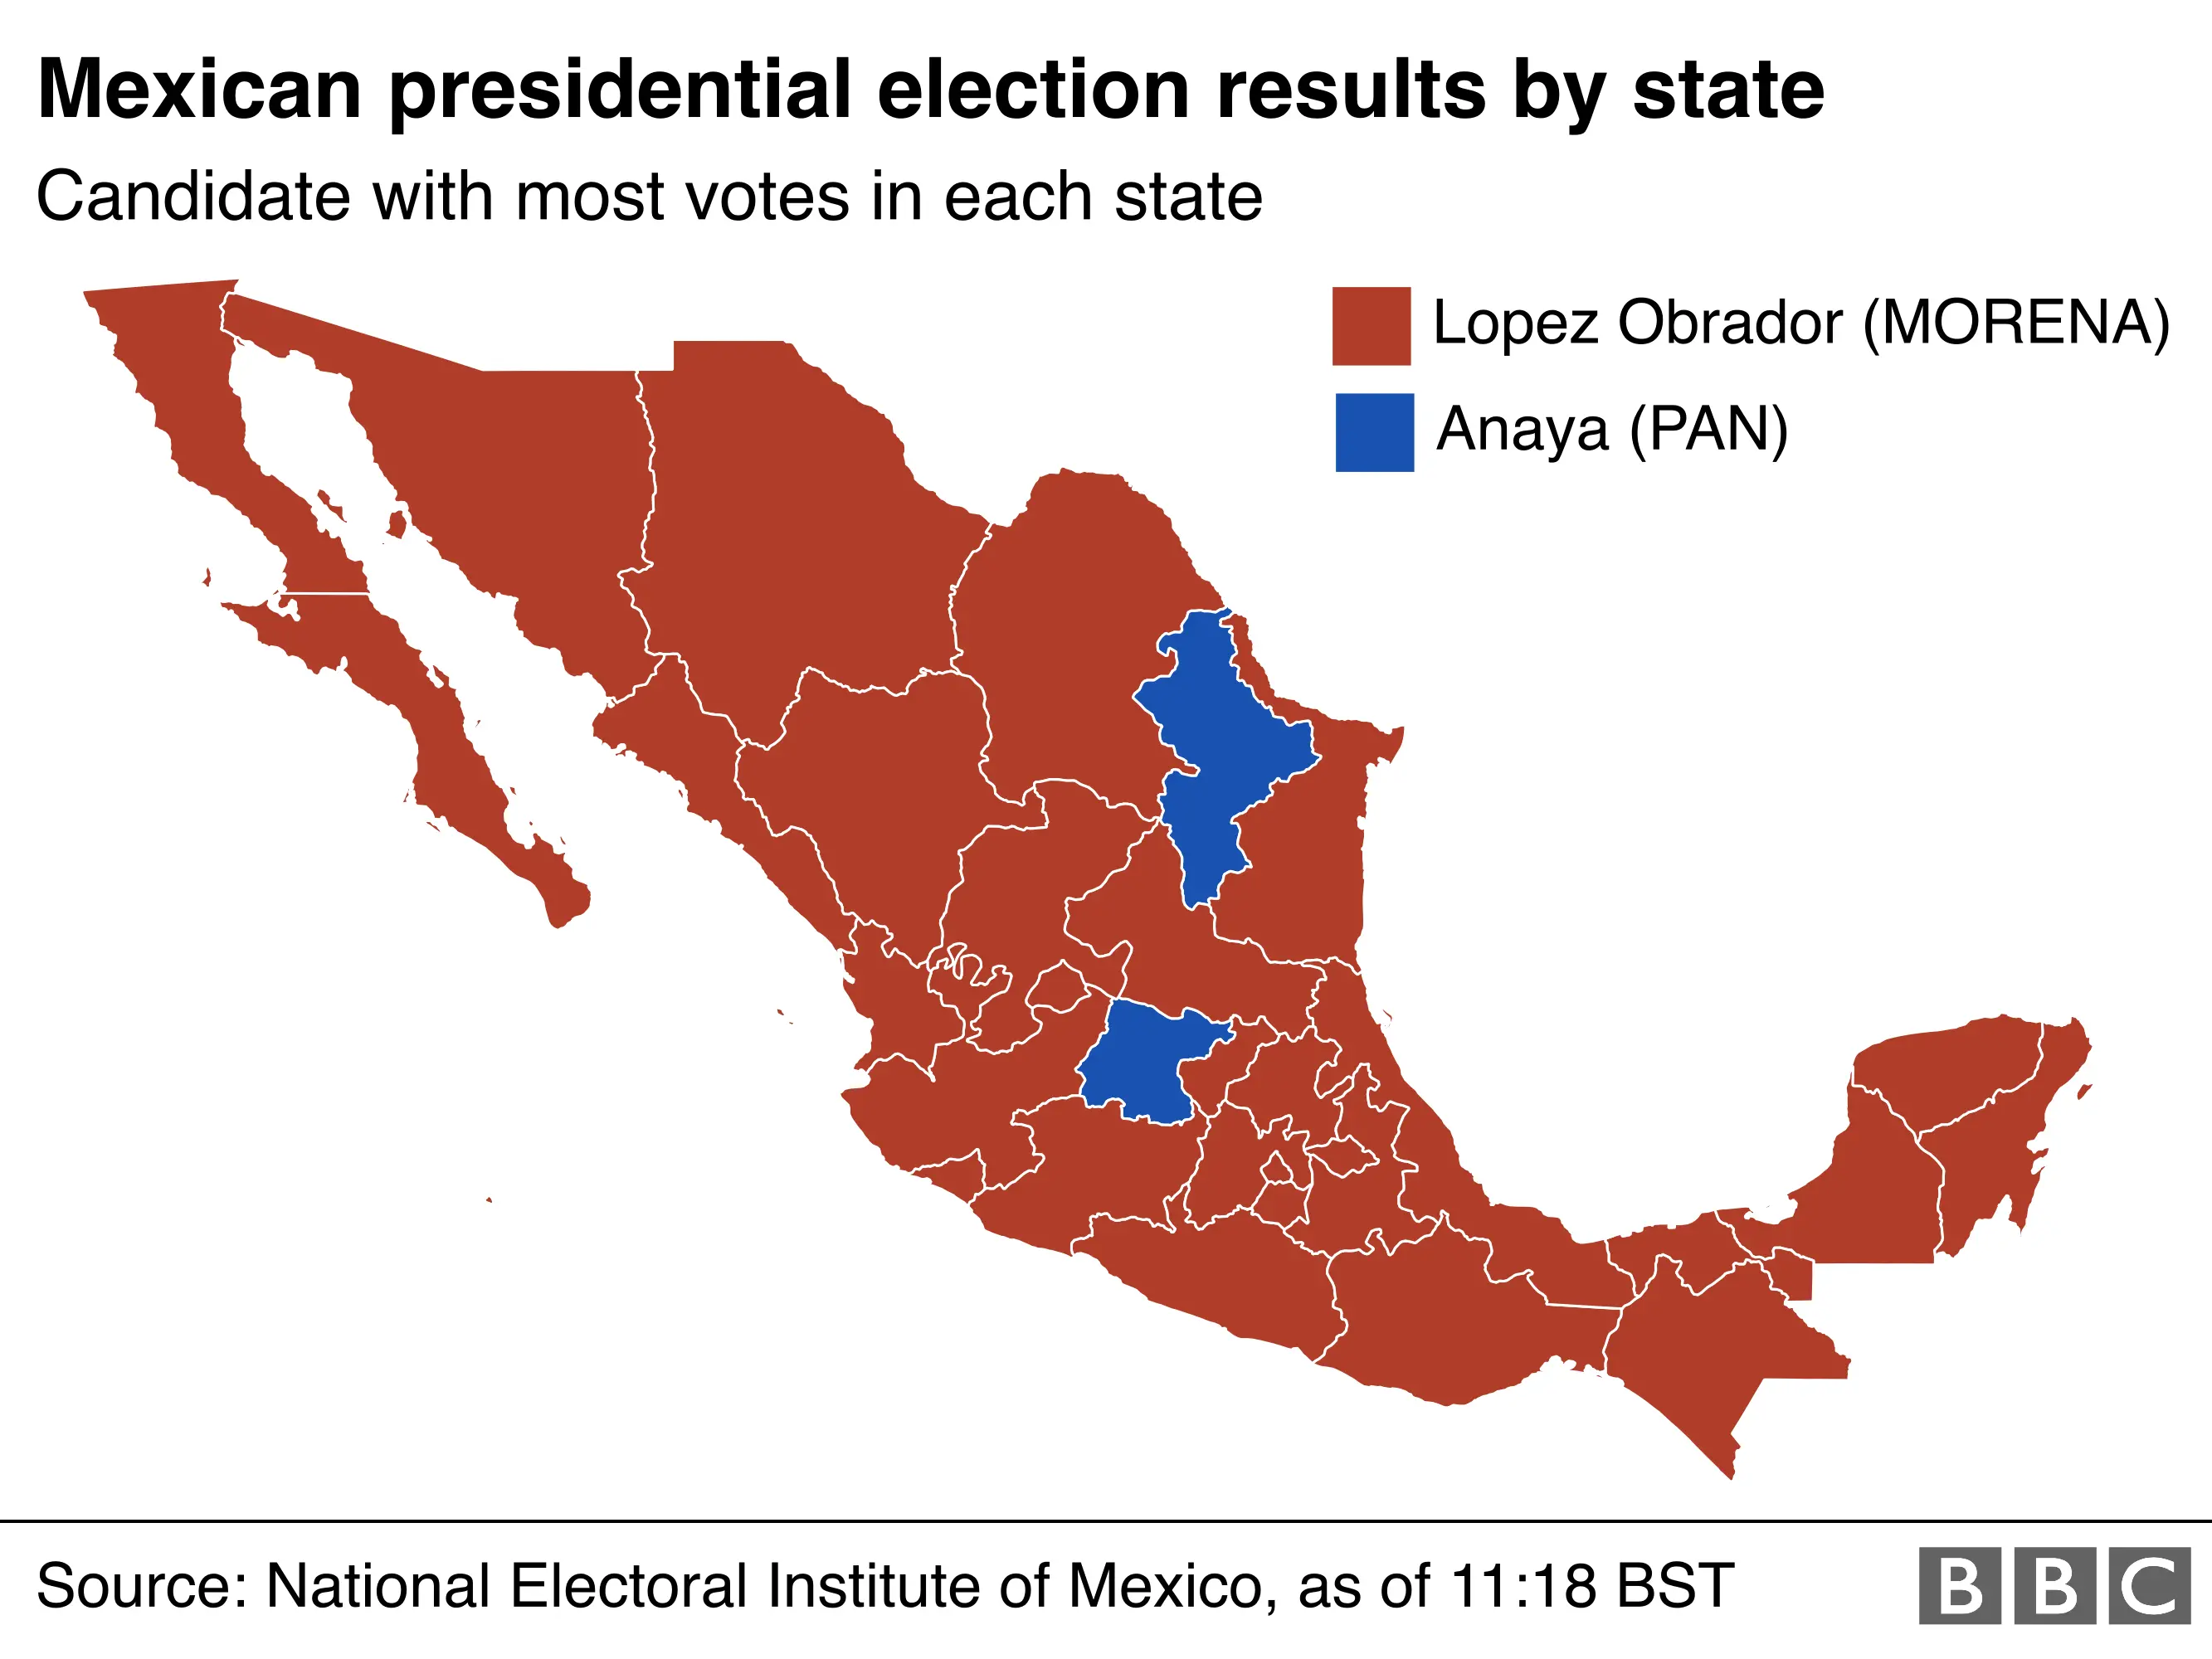 Obrador received the most votes in all but two states